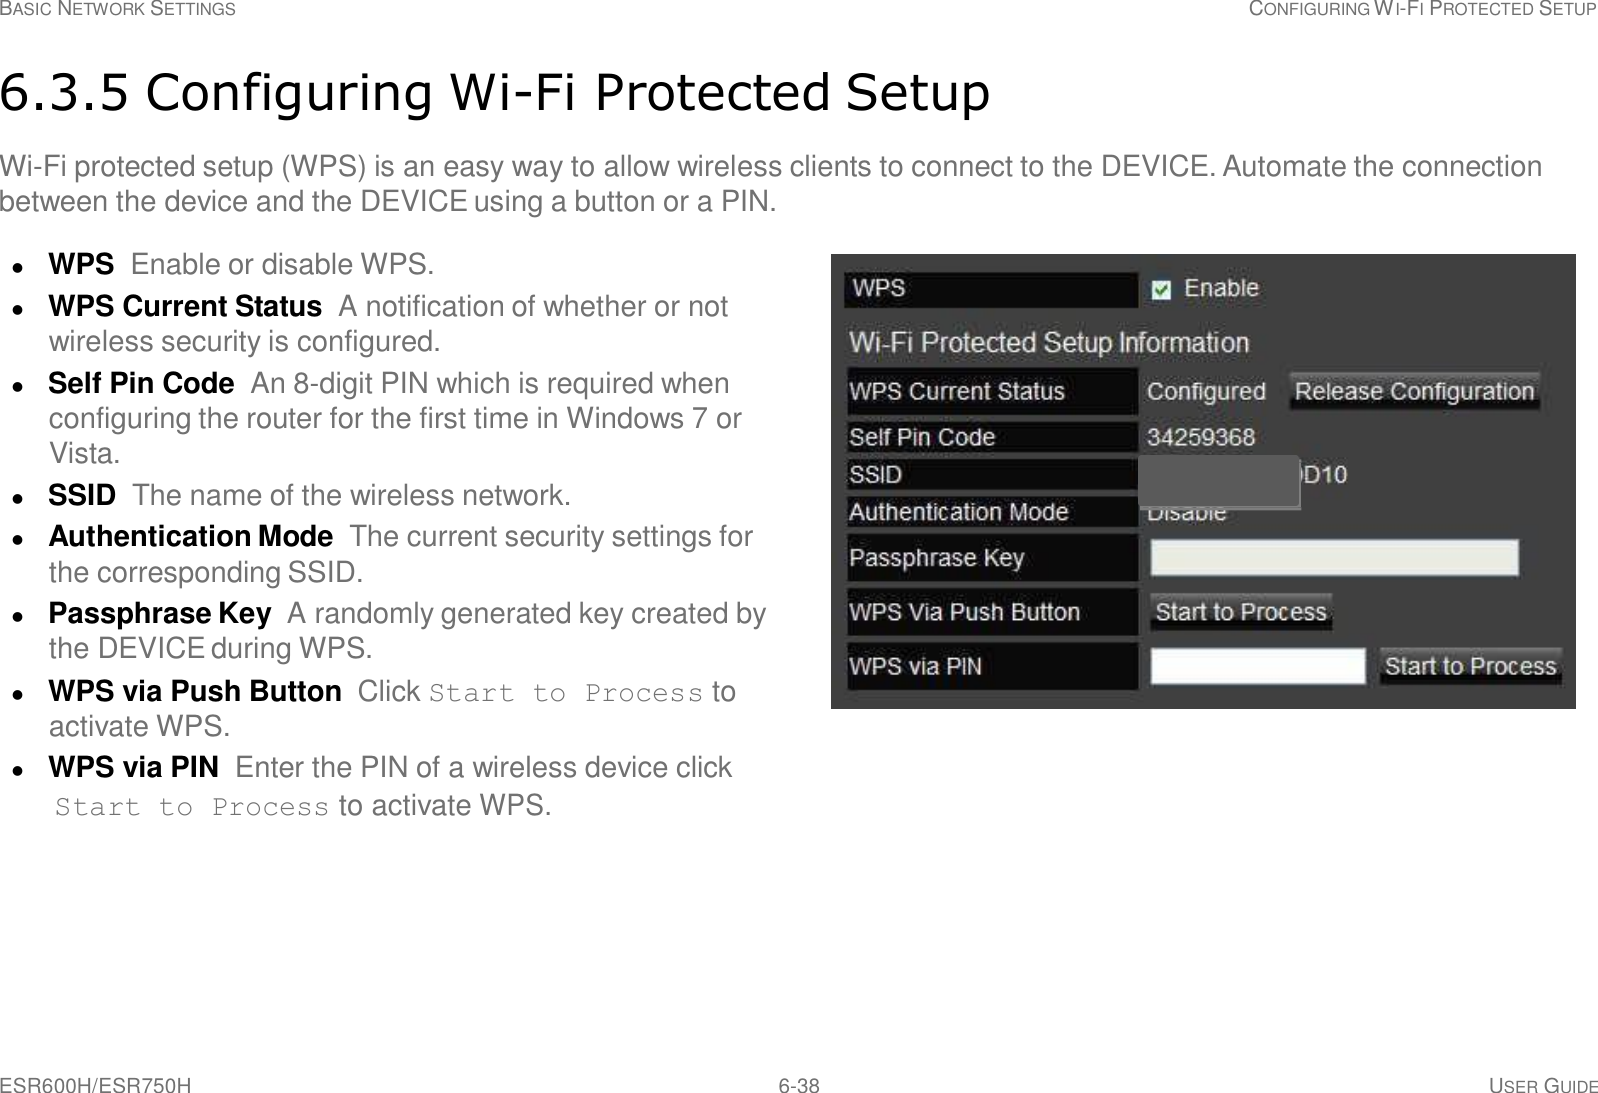 ESR600H/ESR750H 6-38 USER GUIDE BASIC NETWORK SETTINGS CONFIGURING WI-FI PROTECTED SETUP     6.3.5 Configuring Wi-Fi Protected Setup  Wi-Fi protected setup (WPS) is an easy way to allow wireless clients to connect to the DEVICE. Automate the connection between the device and the DEVICE using a button or a PIN.   WPS Enable or disable WPS.  WPS Current Status  A notification of whether or not wireless security is configured.  Self Pin Code  An 8-digit PIN which is required when configuring the router for the first time in Windows 7 or Vista.  SSID  The name of the wireless network.  Authentication Mode  The current security settings for the corresponding SSID.  Passphrase Key  A randomly generated key created by the DEVICE during WPS.  WPS via Push Button  Click Start to Process to activate WPS.  WPS via PIN  Enter the PIN of a wireless device click Start to Process to activate WPS. 